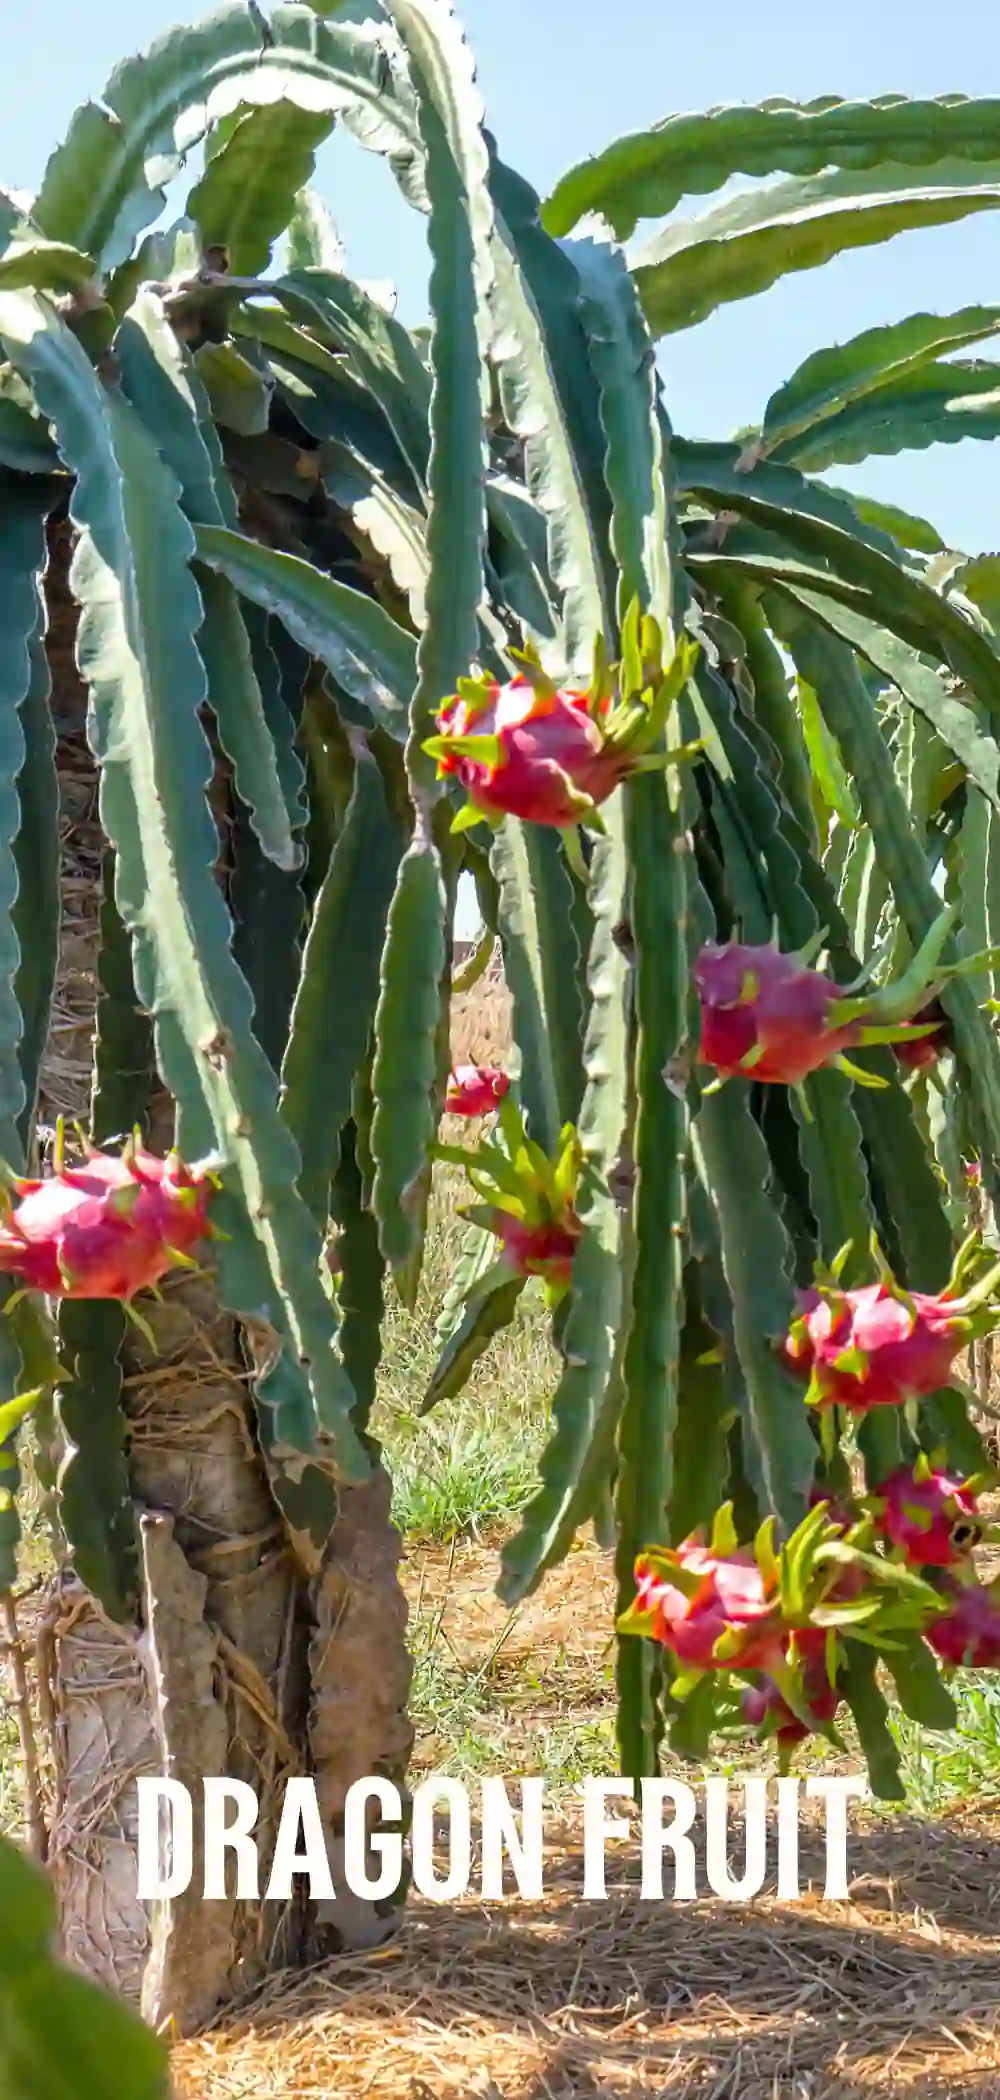 Image of a Dragon Fruit Plant